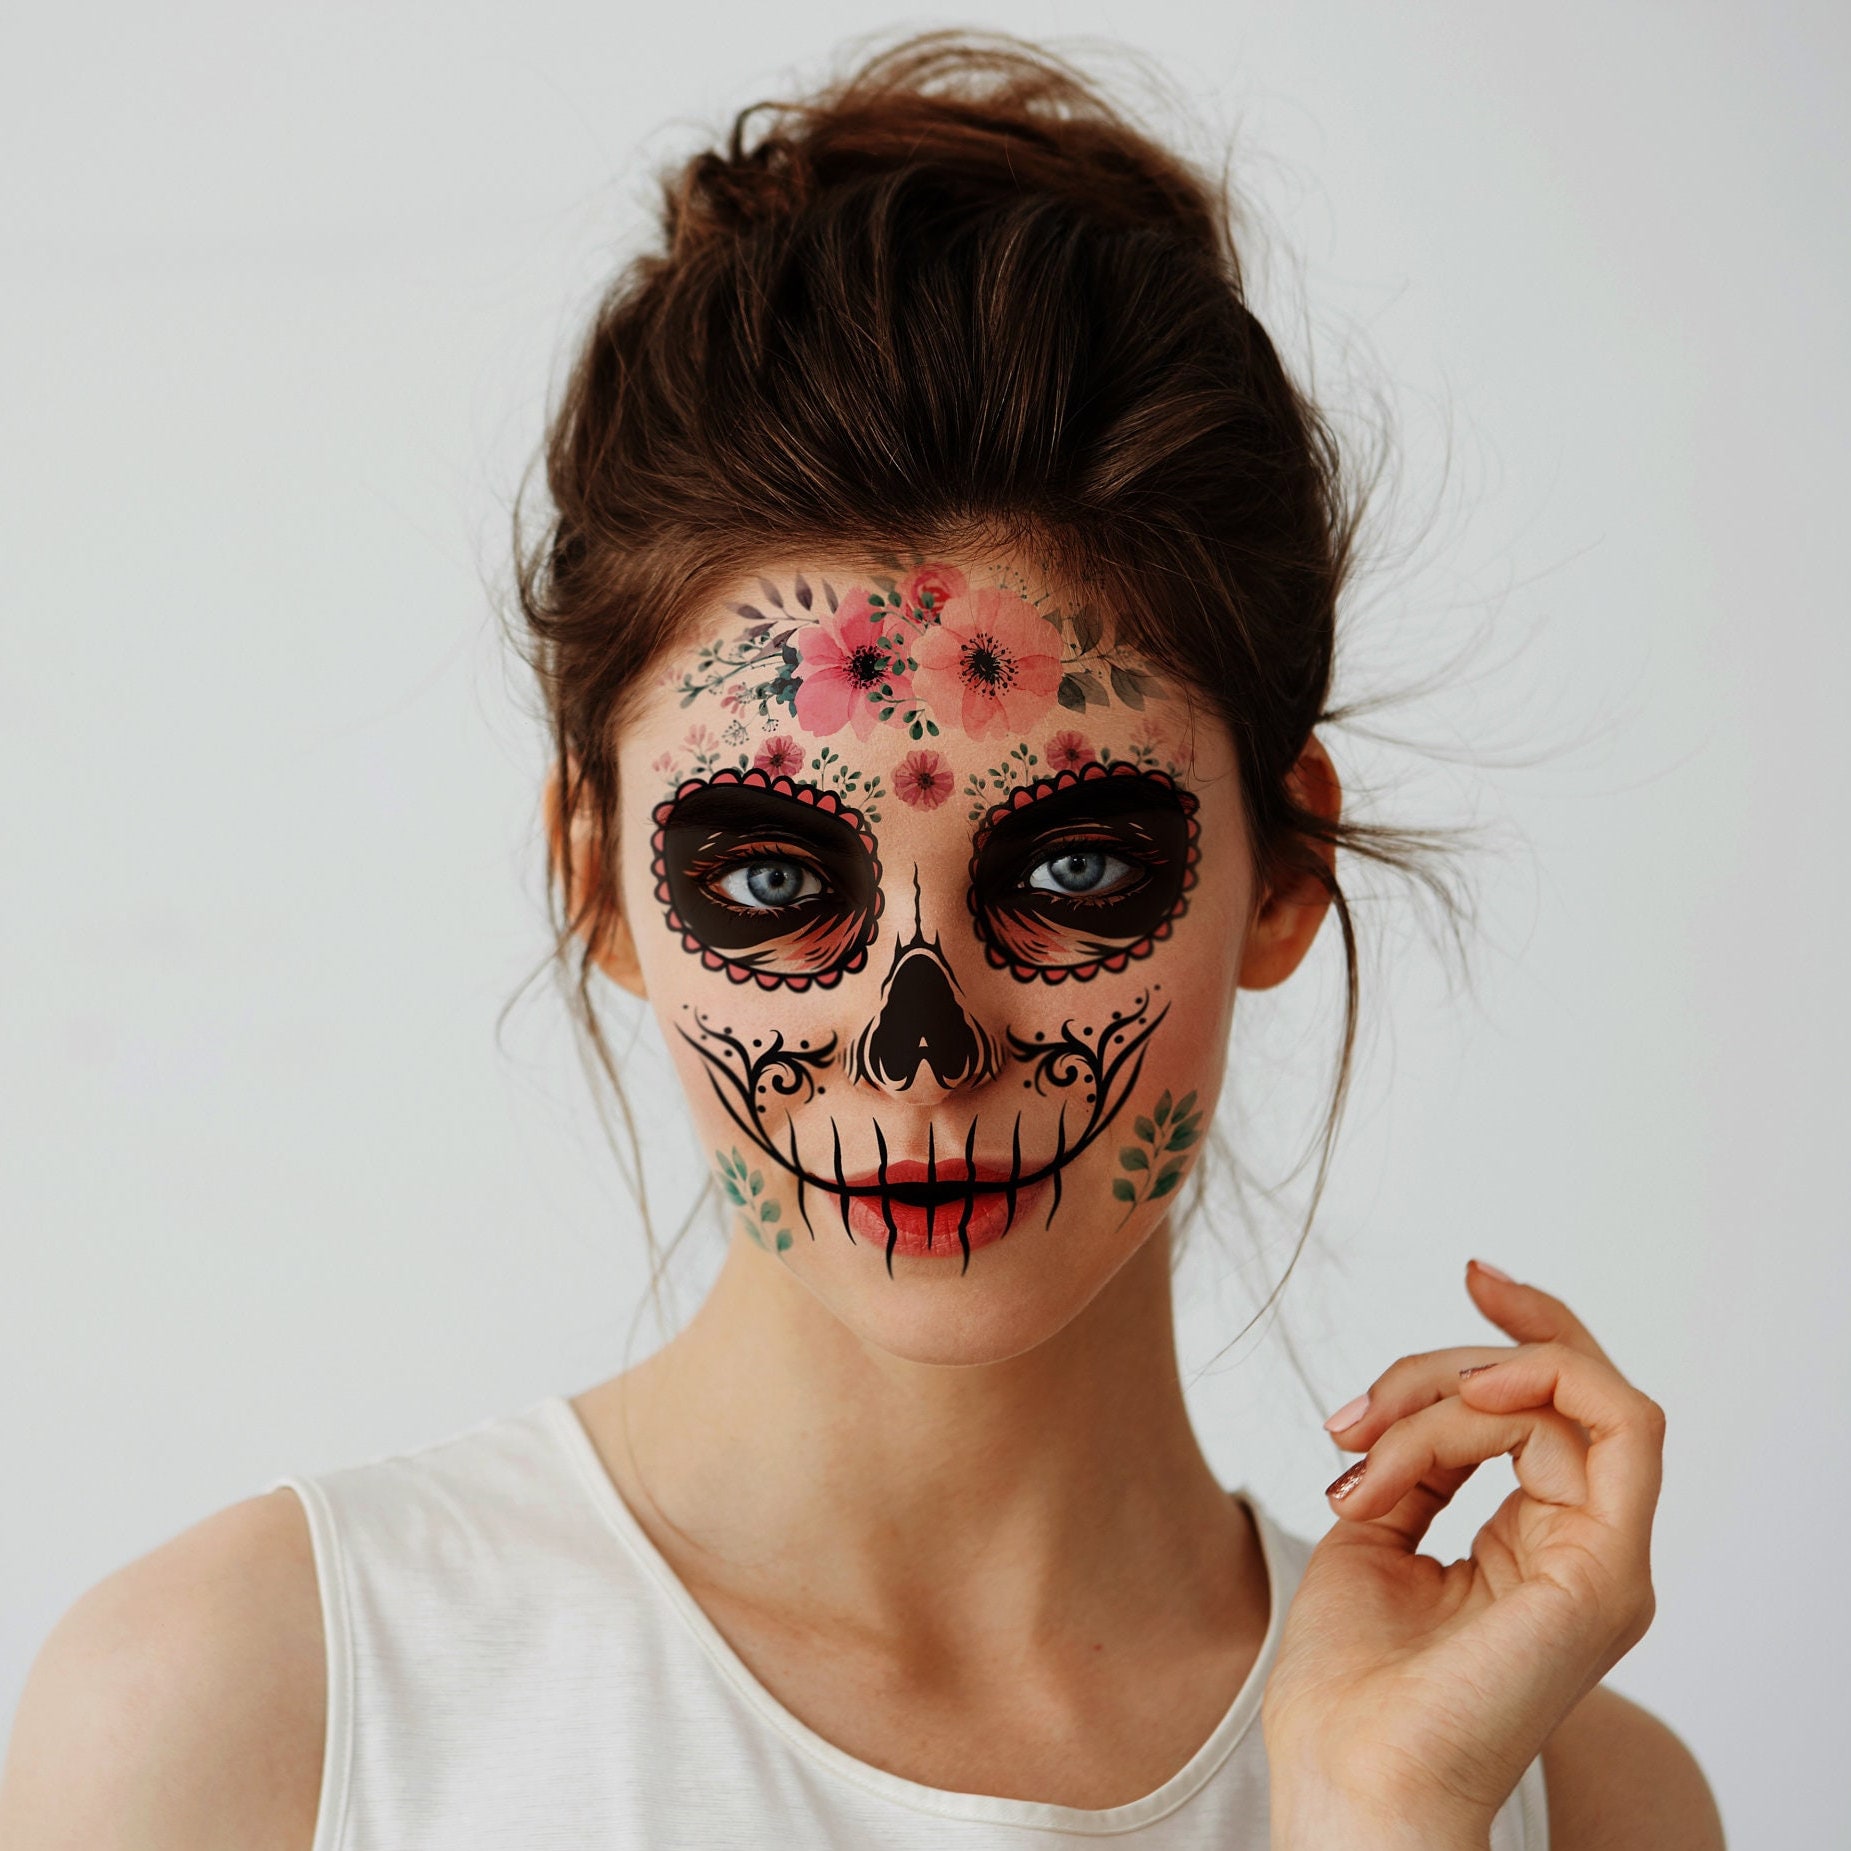 Day Of The Dead Face Tattoos12 Sheets Halloween Sugar Skull Temporary  Costume Makeup Tattoo KitFloral Black Skeleton Web Red  Buy Temporary  TattoosDead Face TattoosCostume Makeup Tattoo Product on Alibabacom